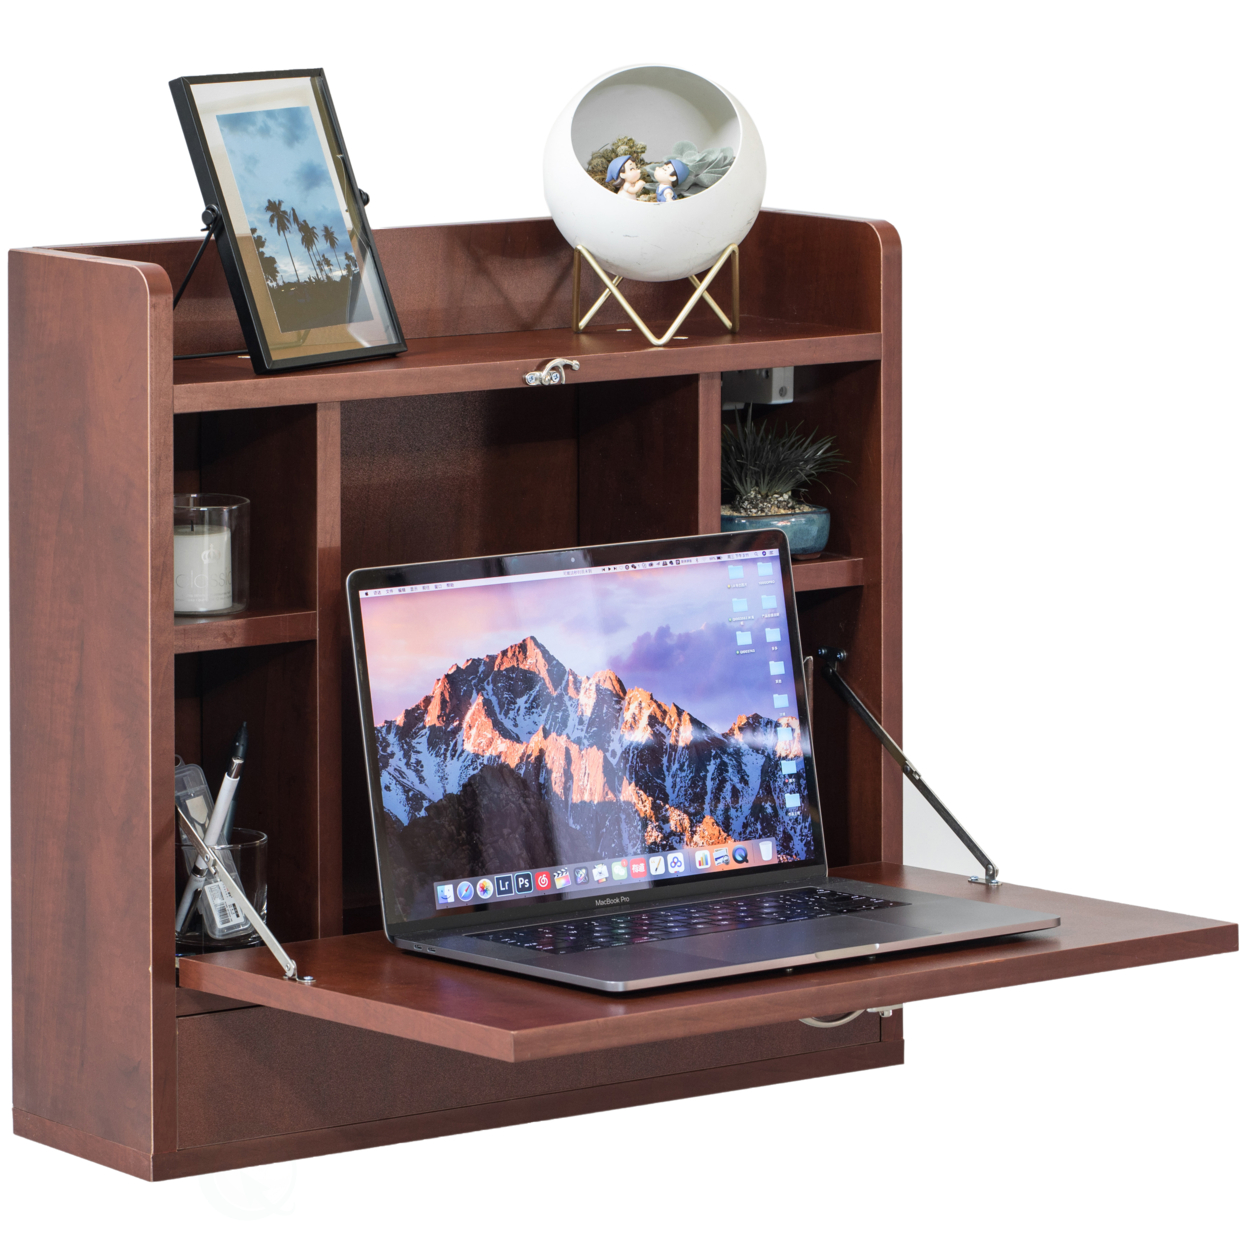 Wall Mount Folding Laptop Writing Computer Or Makeup Desk With Storage Shelves And Drawer - Black